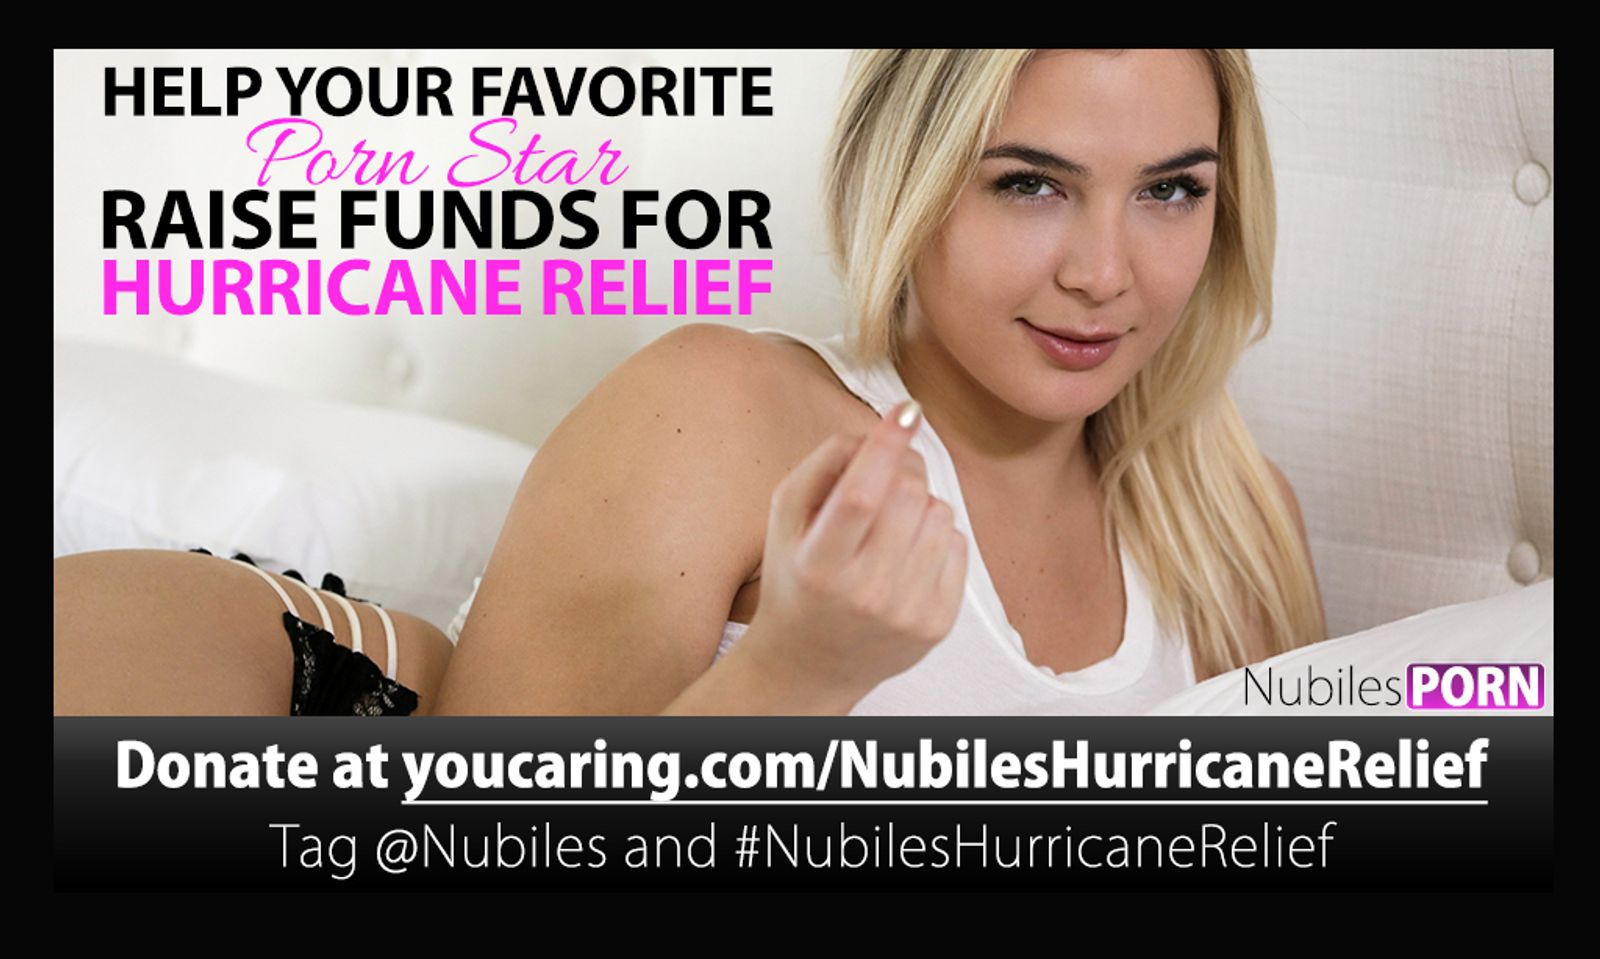 Nubiles Network Launches Fundraiser for Hurricane Victims